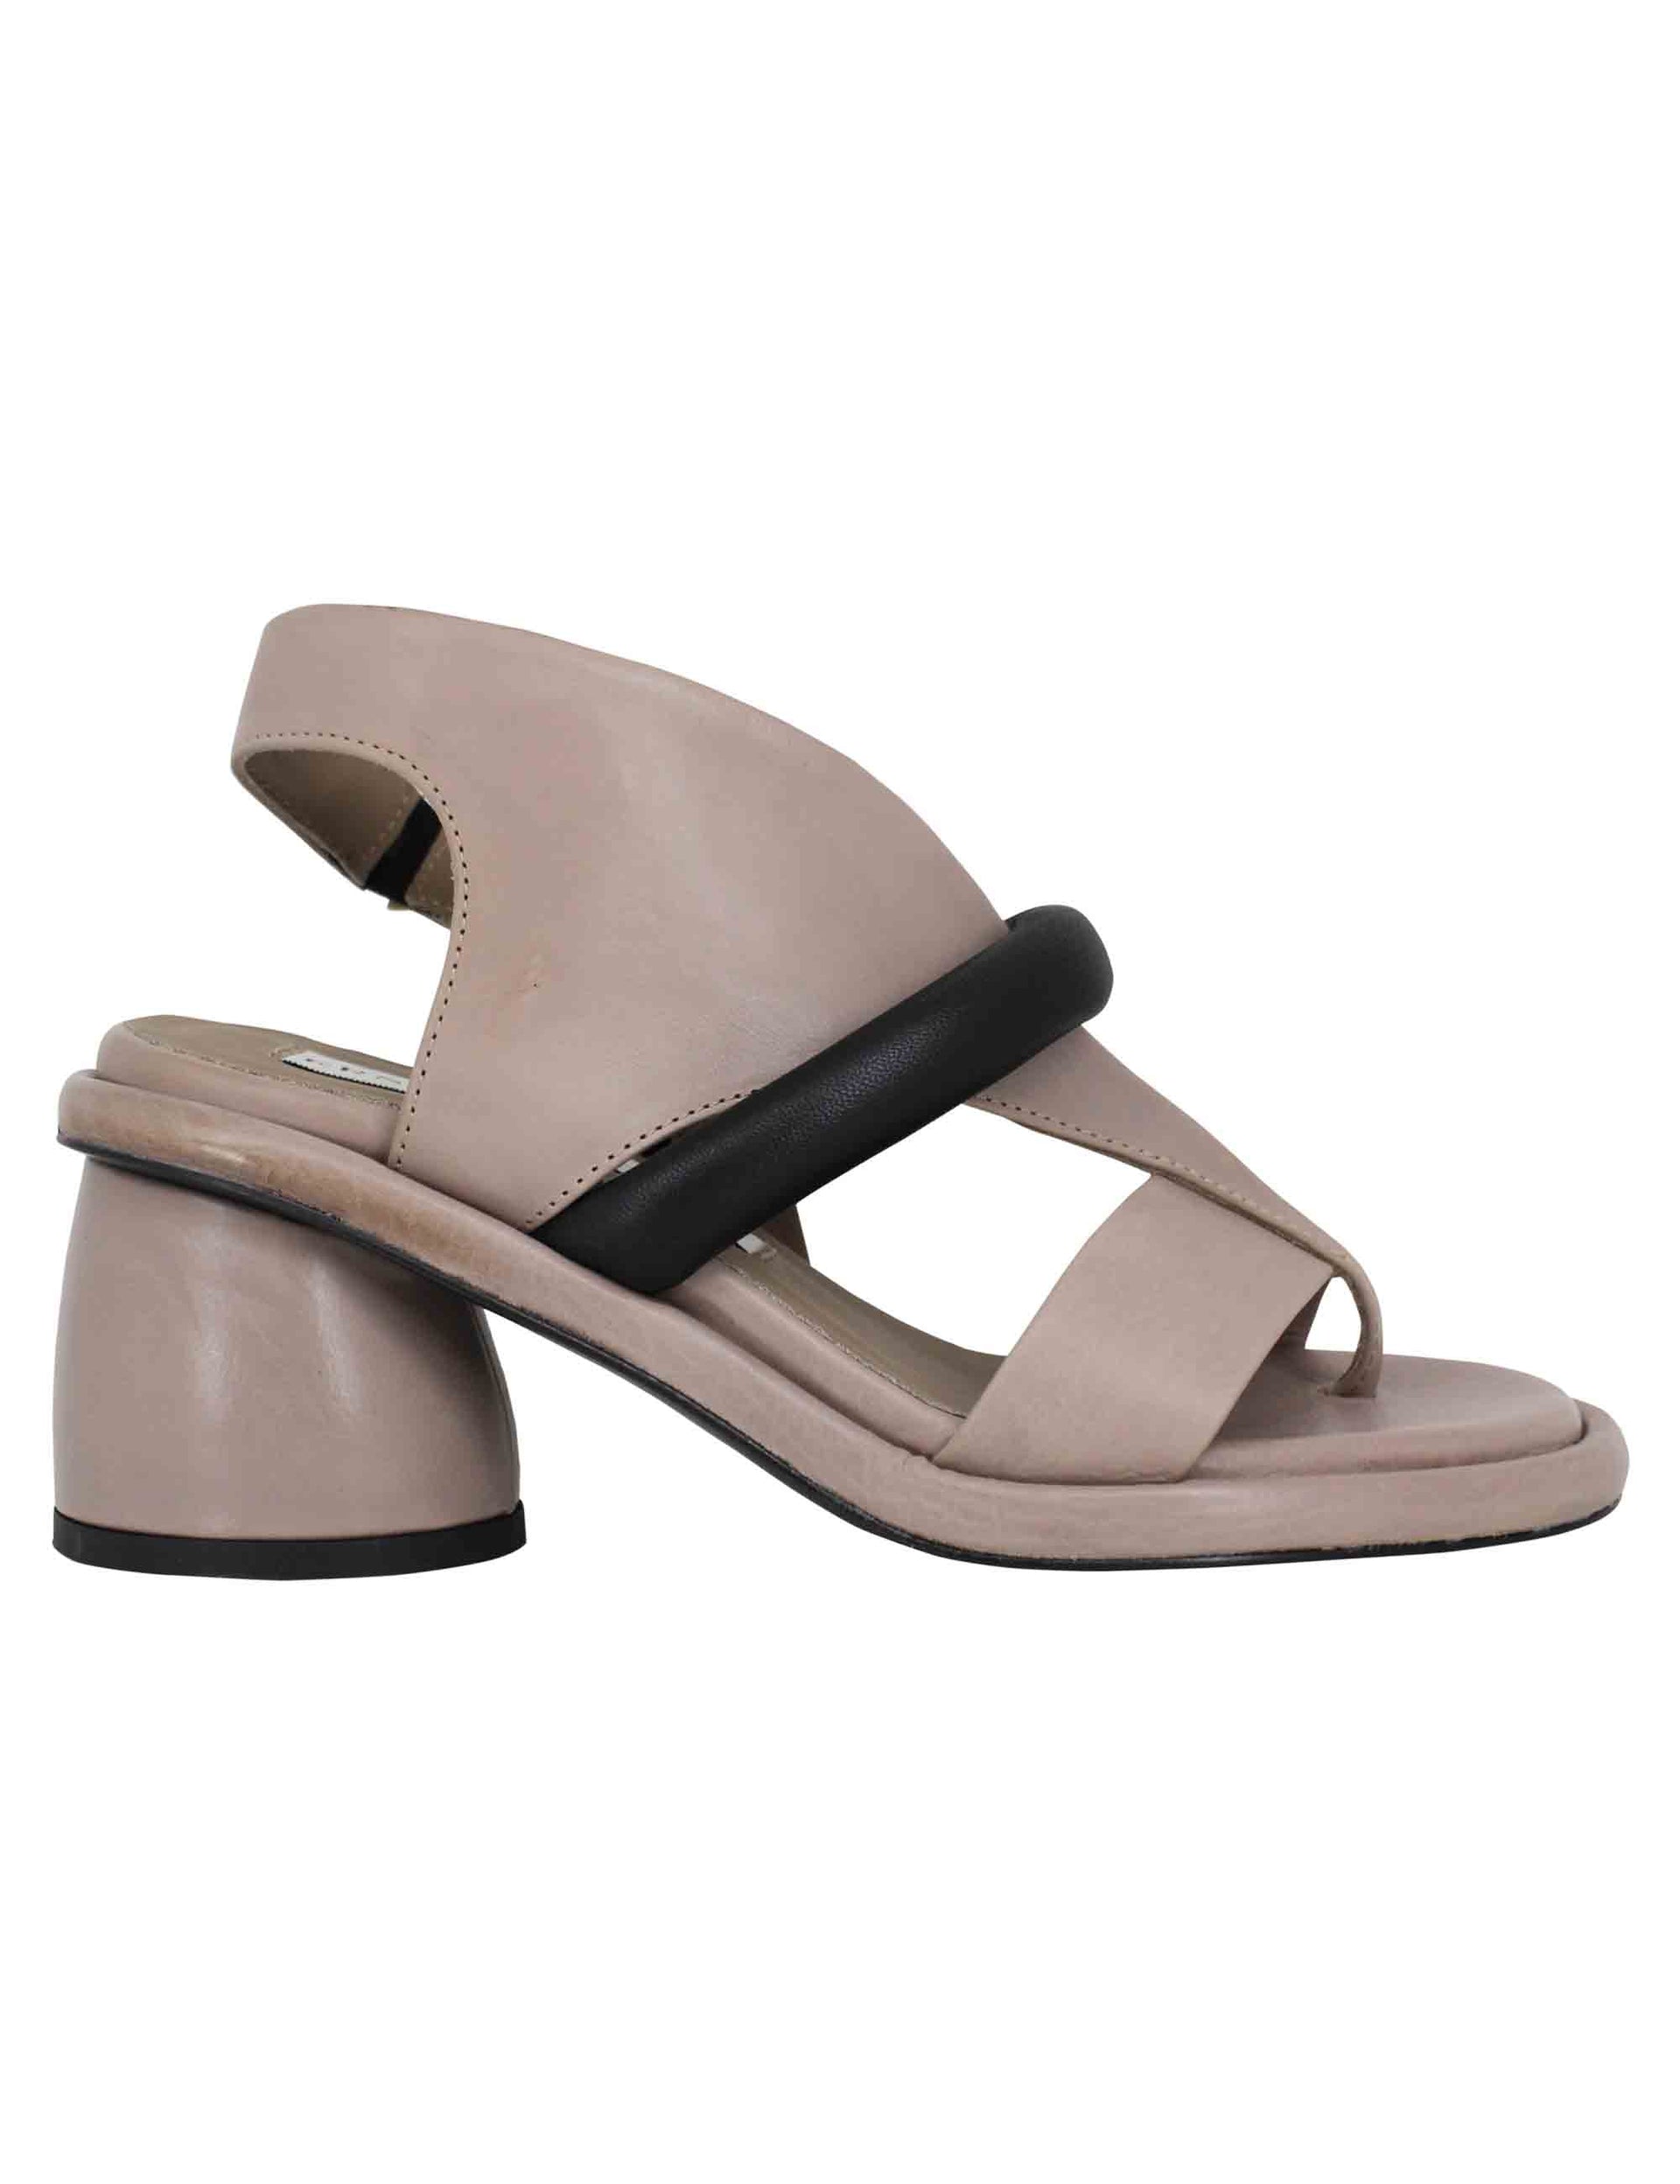 Women's thong sandals in taupe leather with round toe